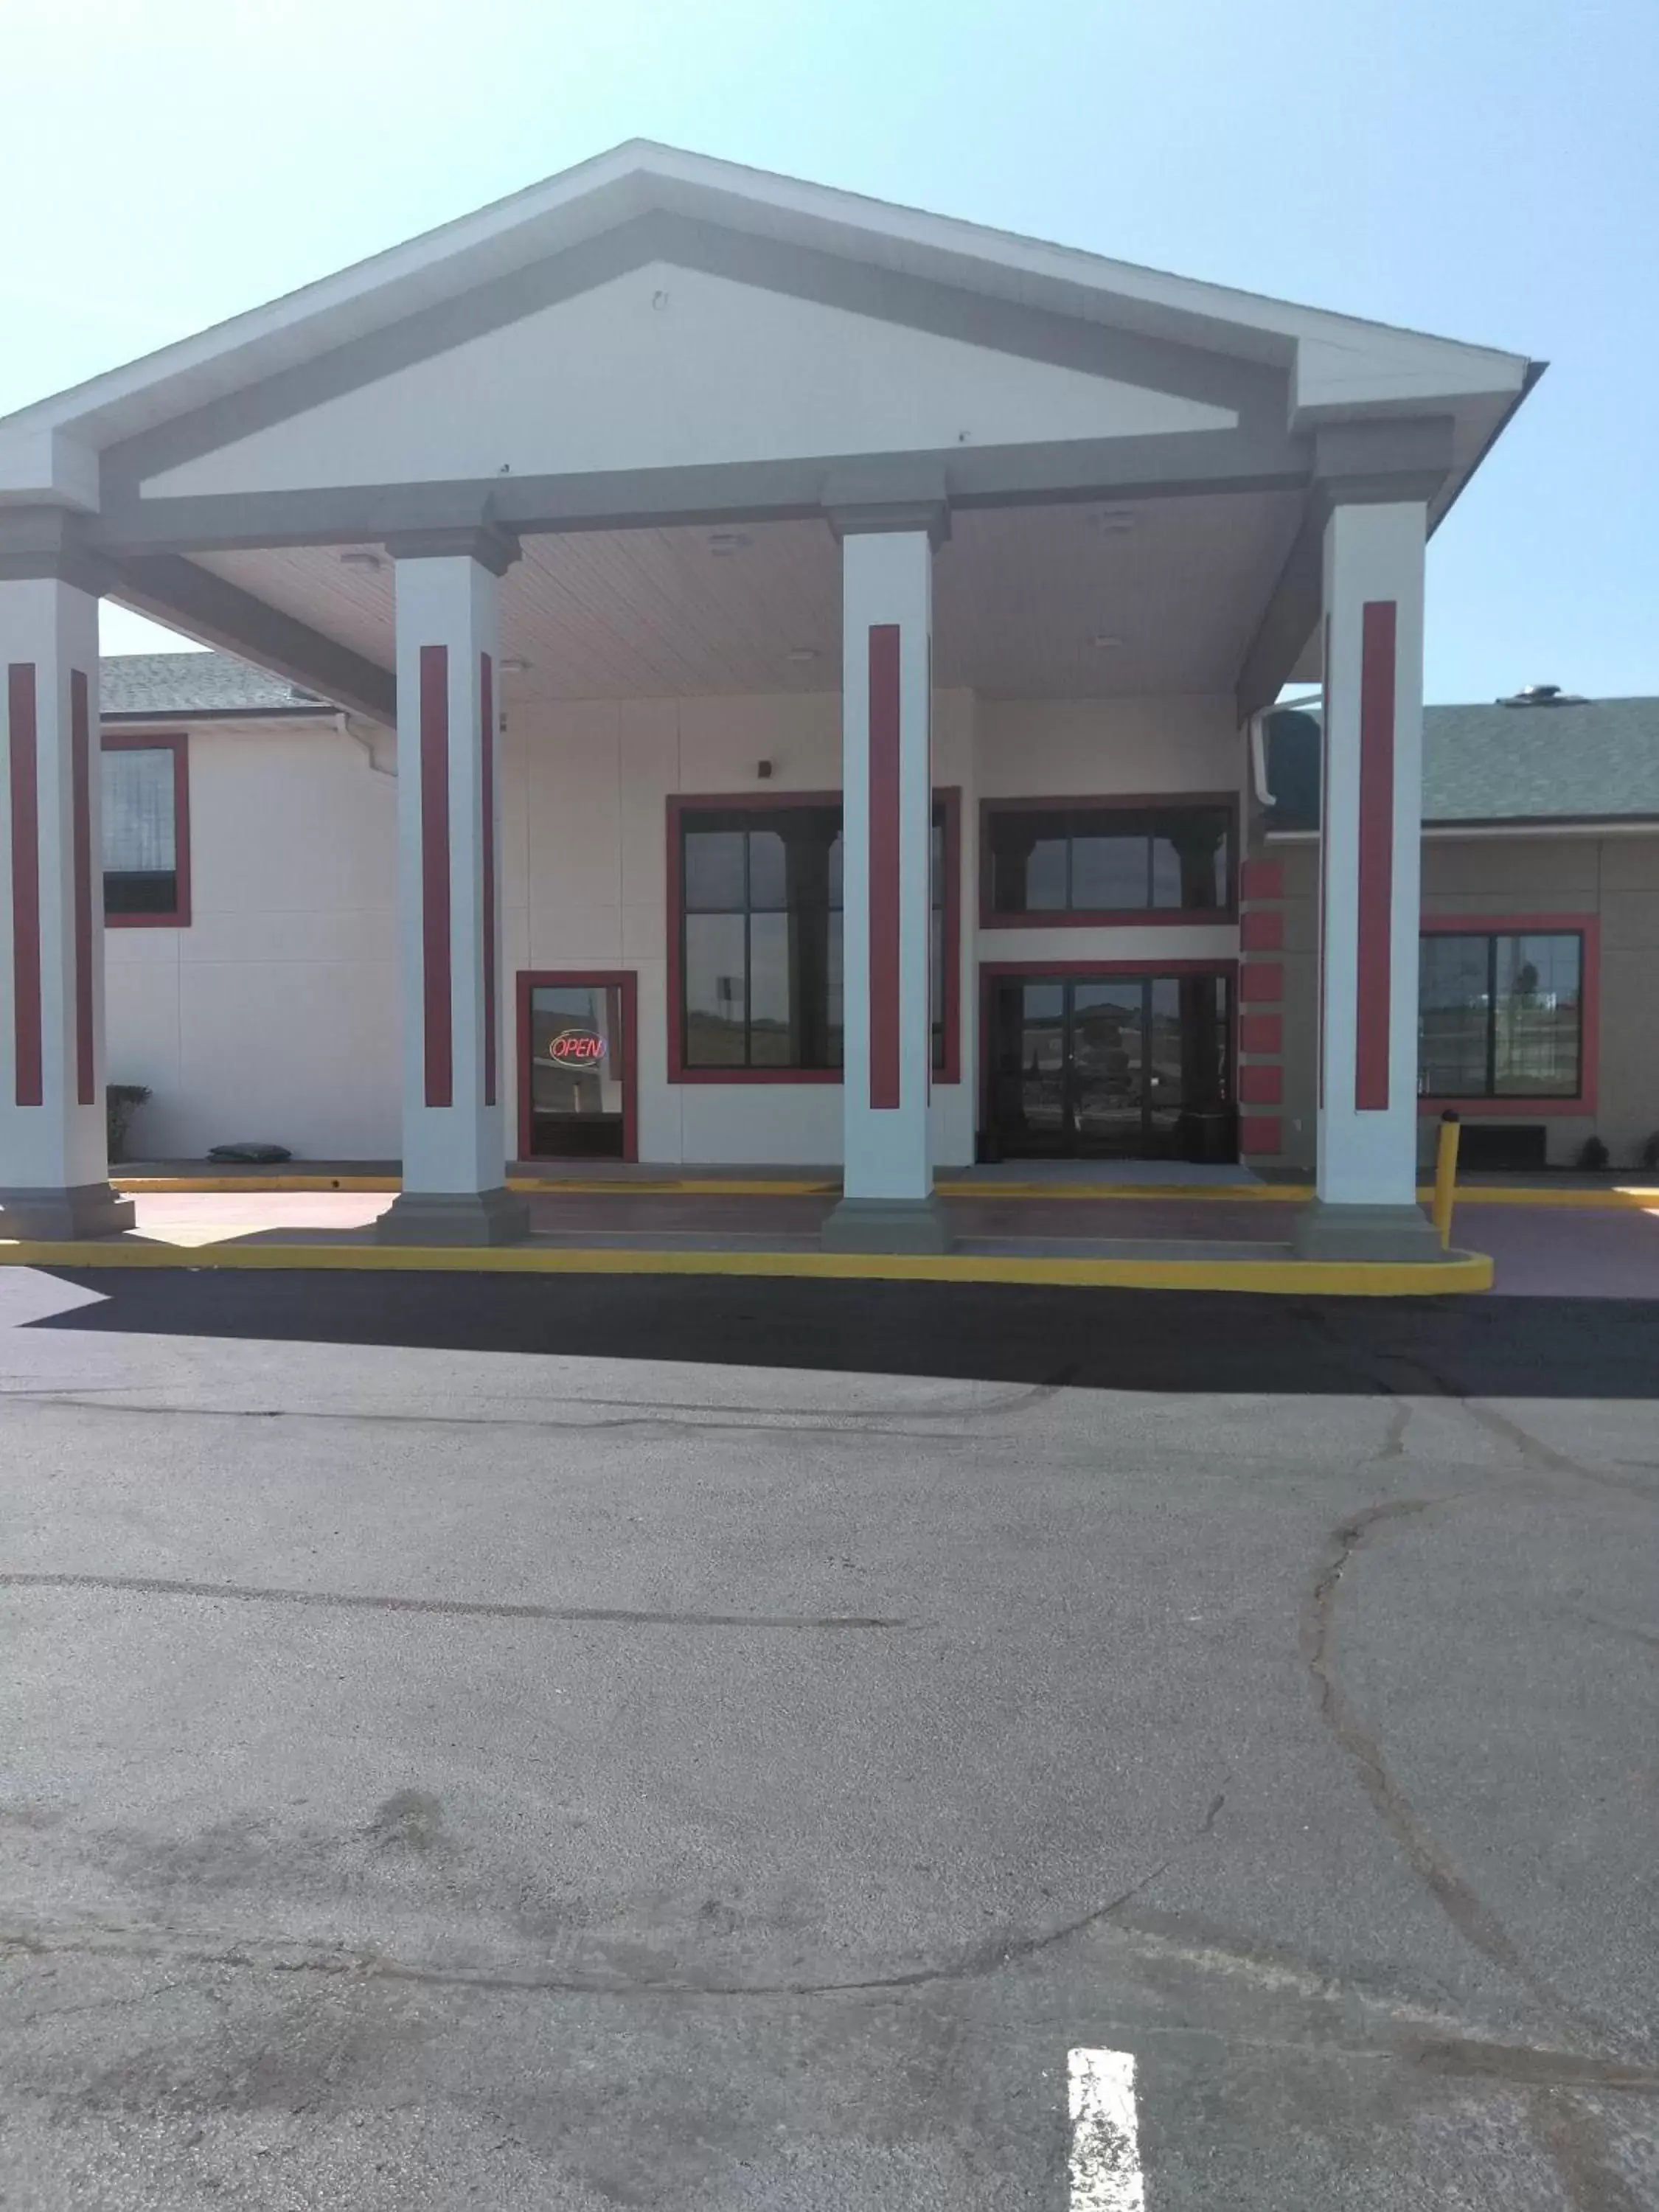 Facade/entrance, Property Building in Quality Inn & Suites